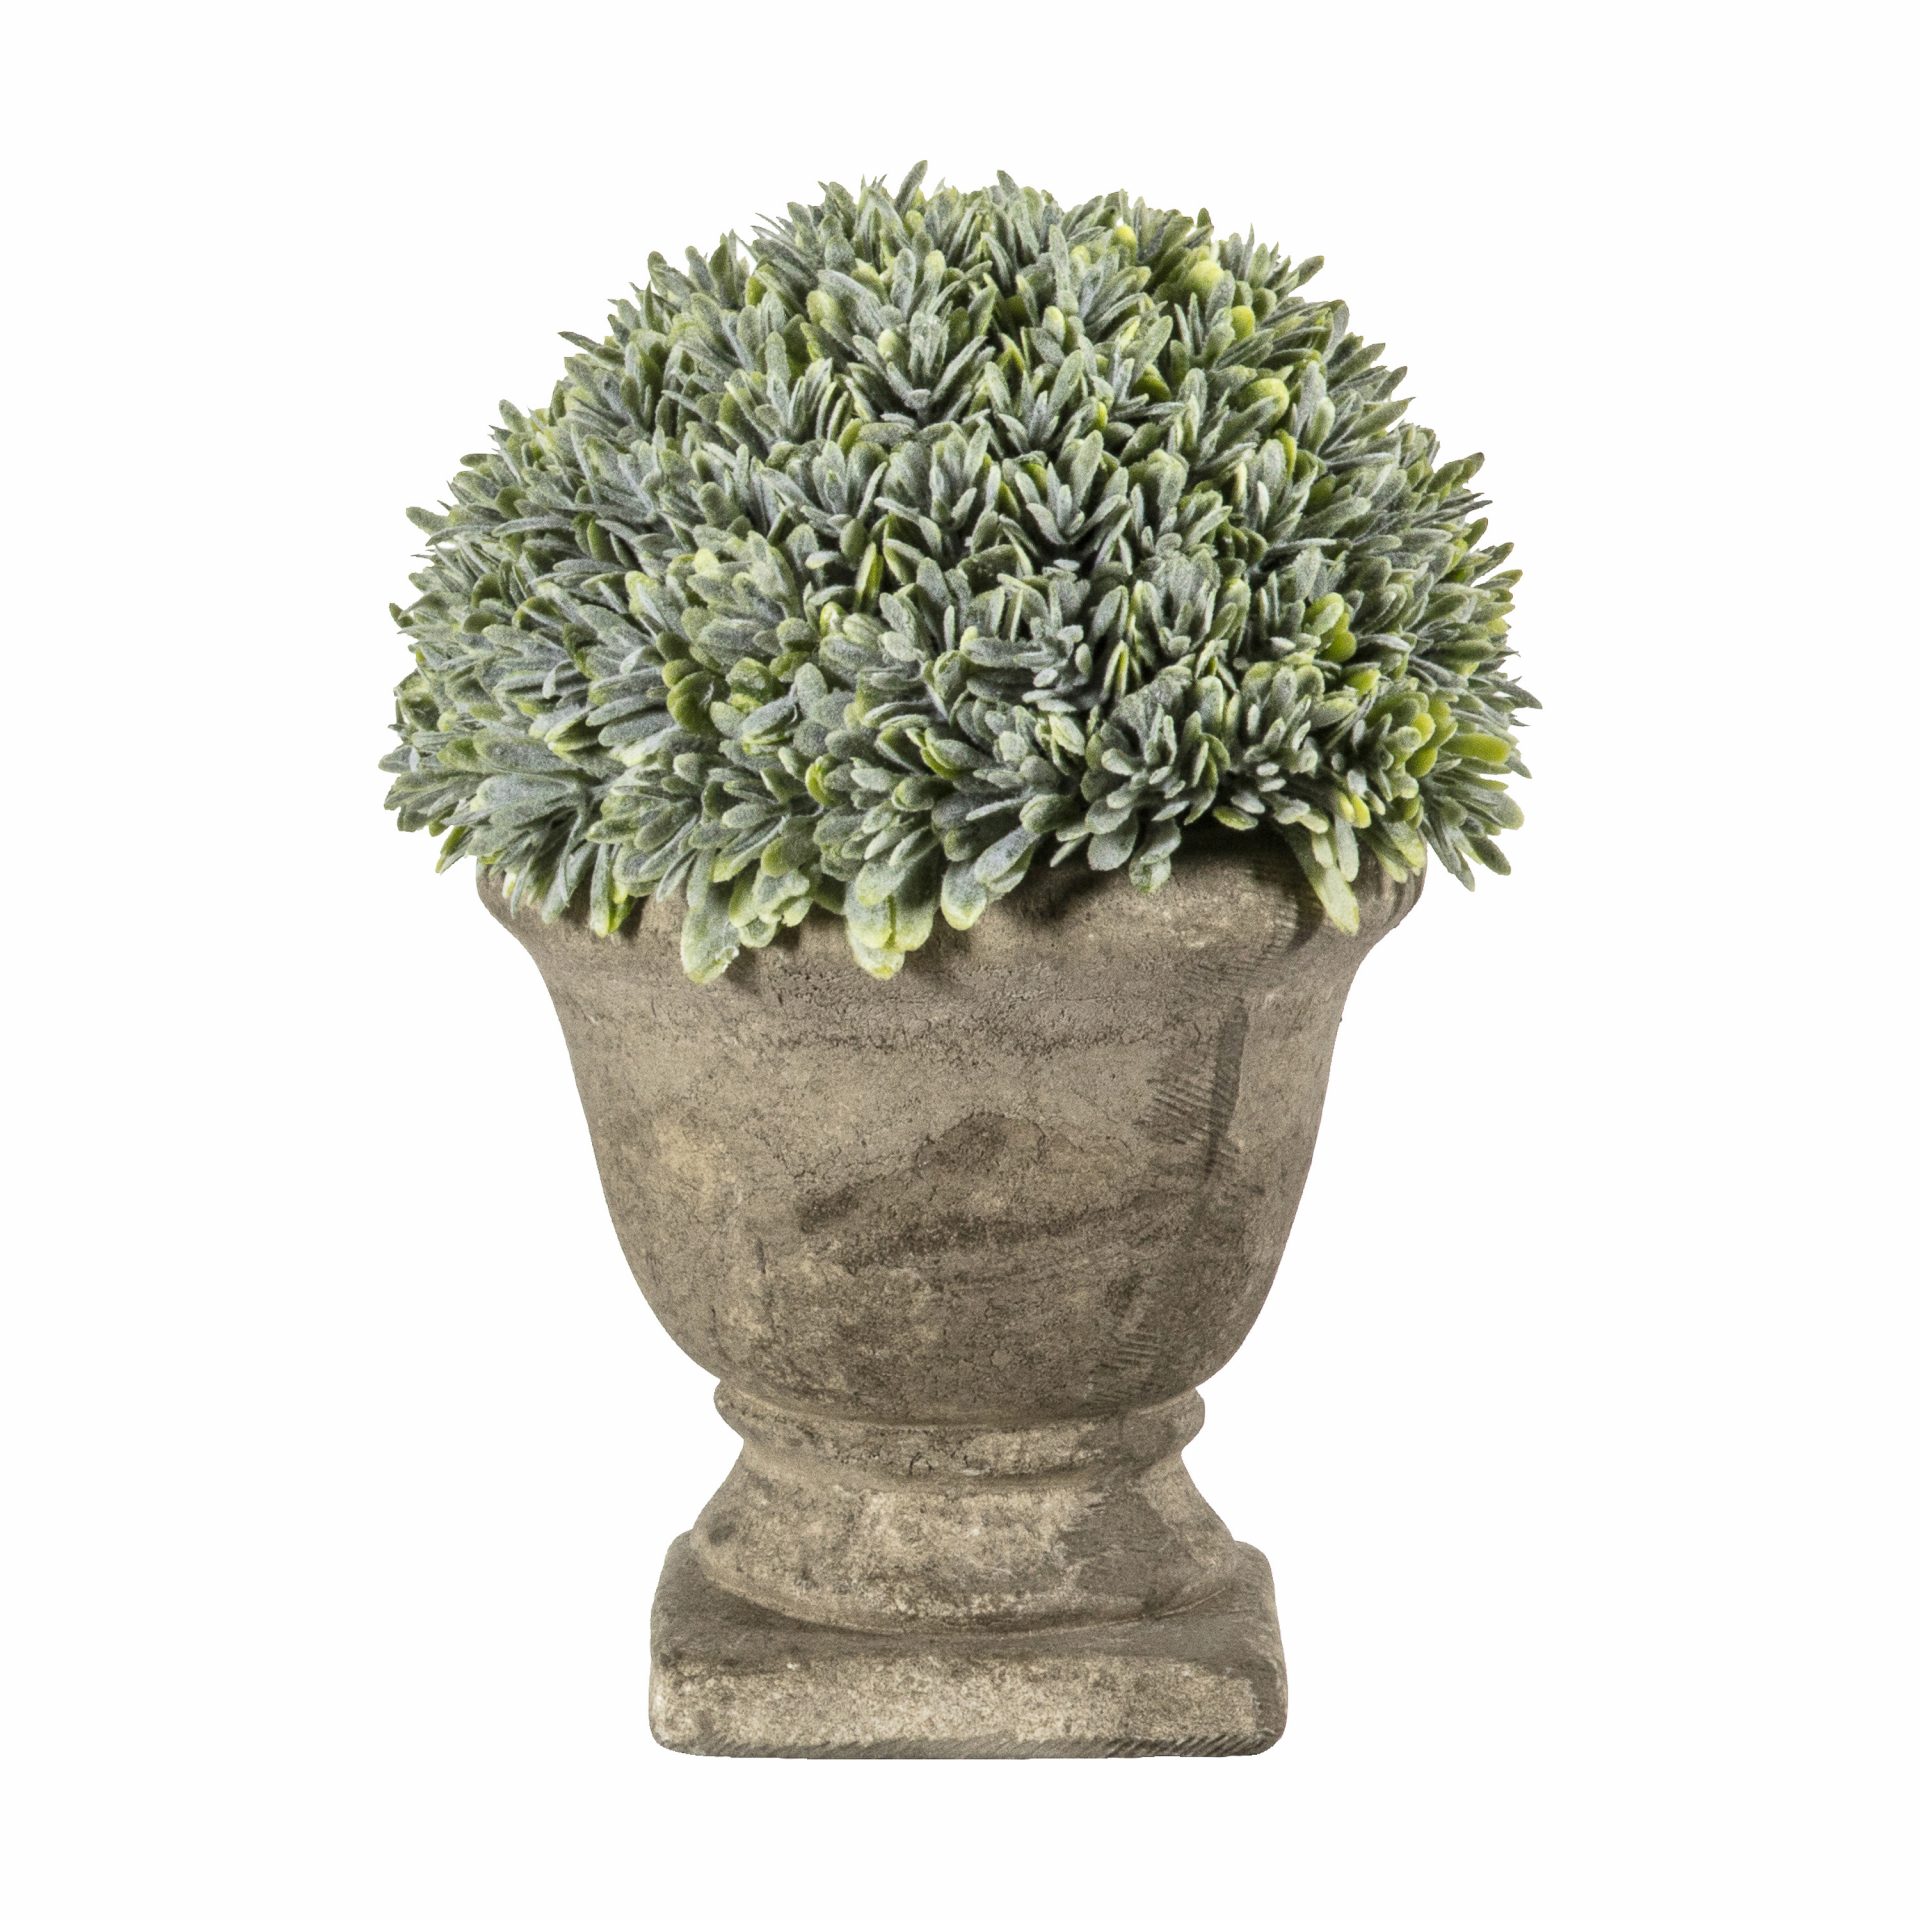 Small Faux Boxwood Urn, artificial plants, stone effect